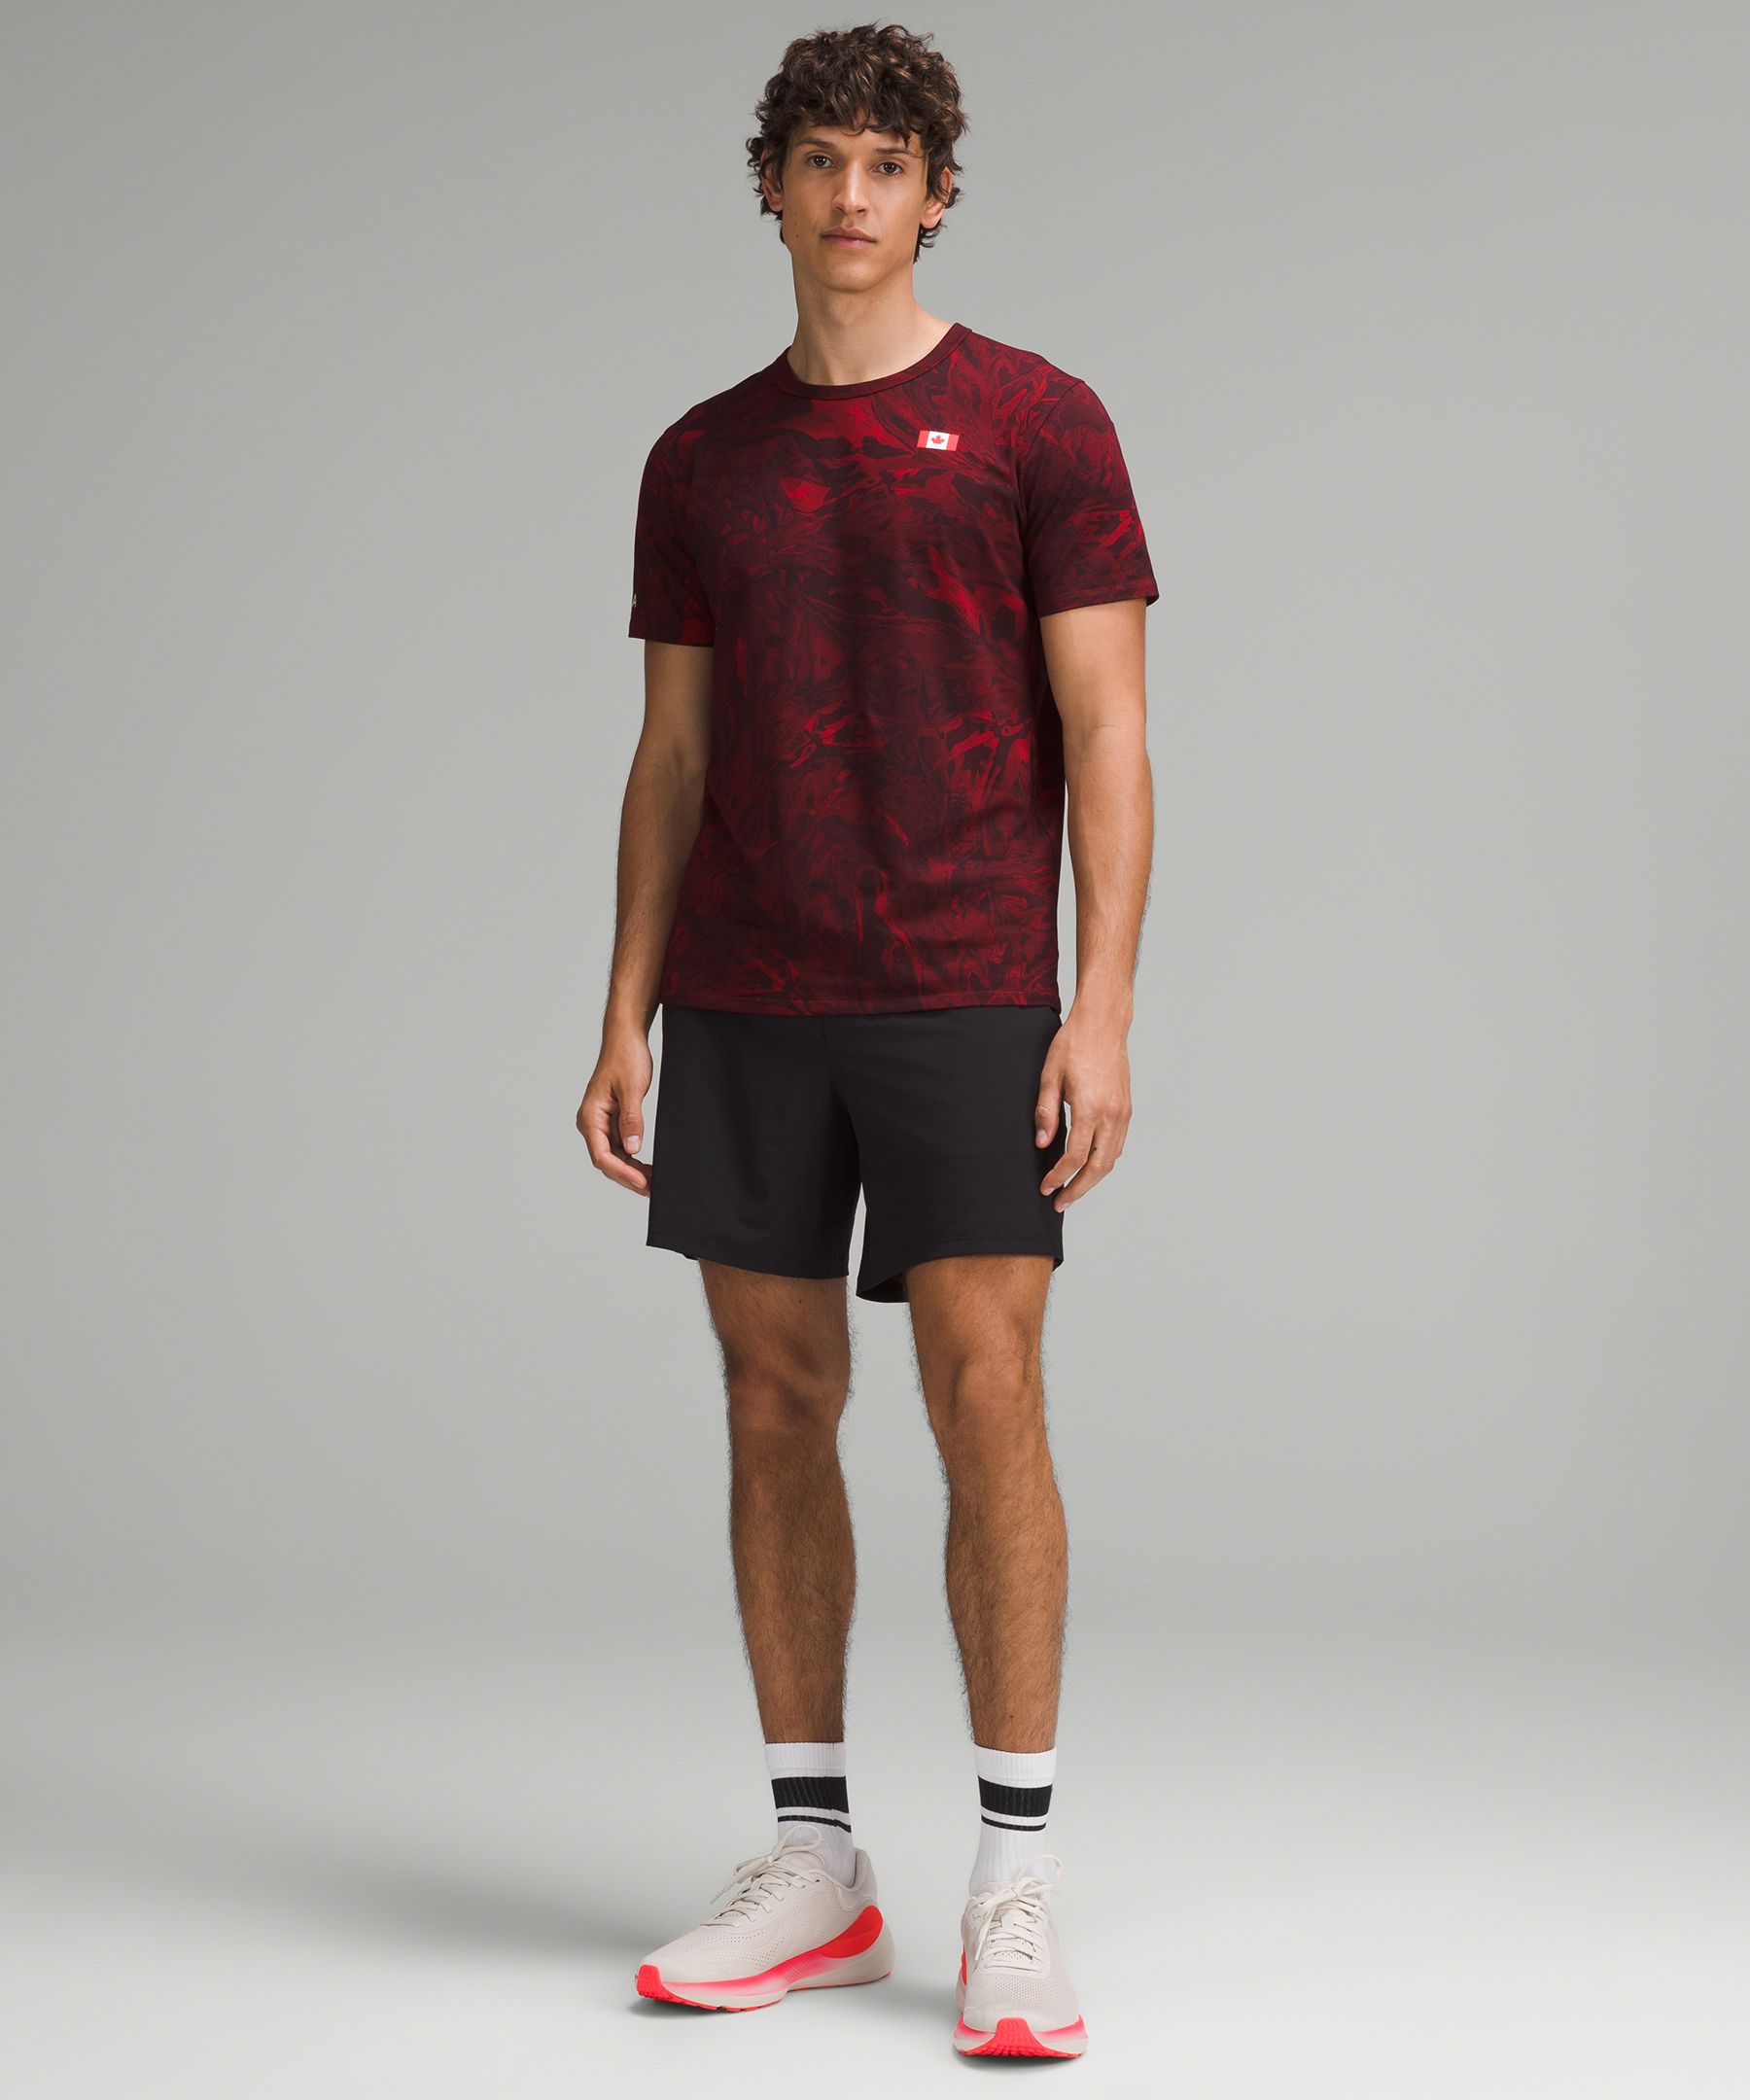 lululemon launches the official Team Canada collection, these are